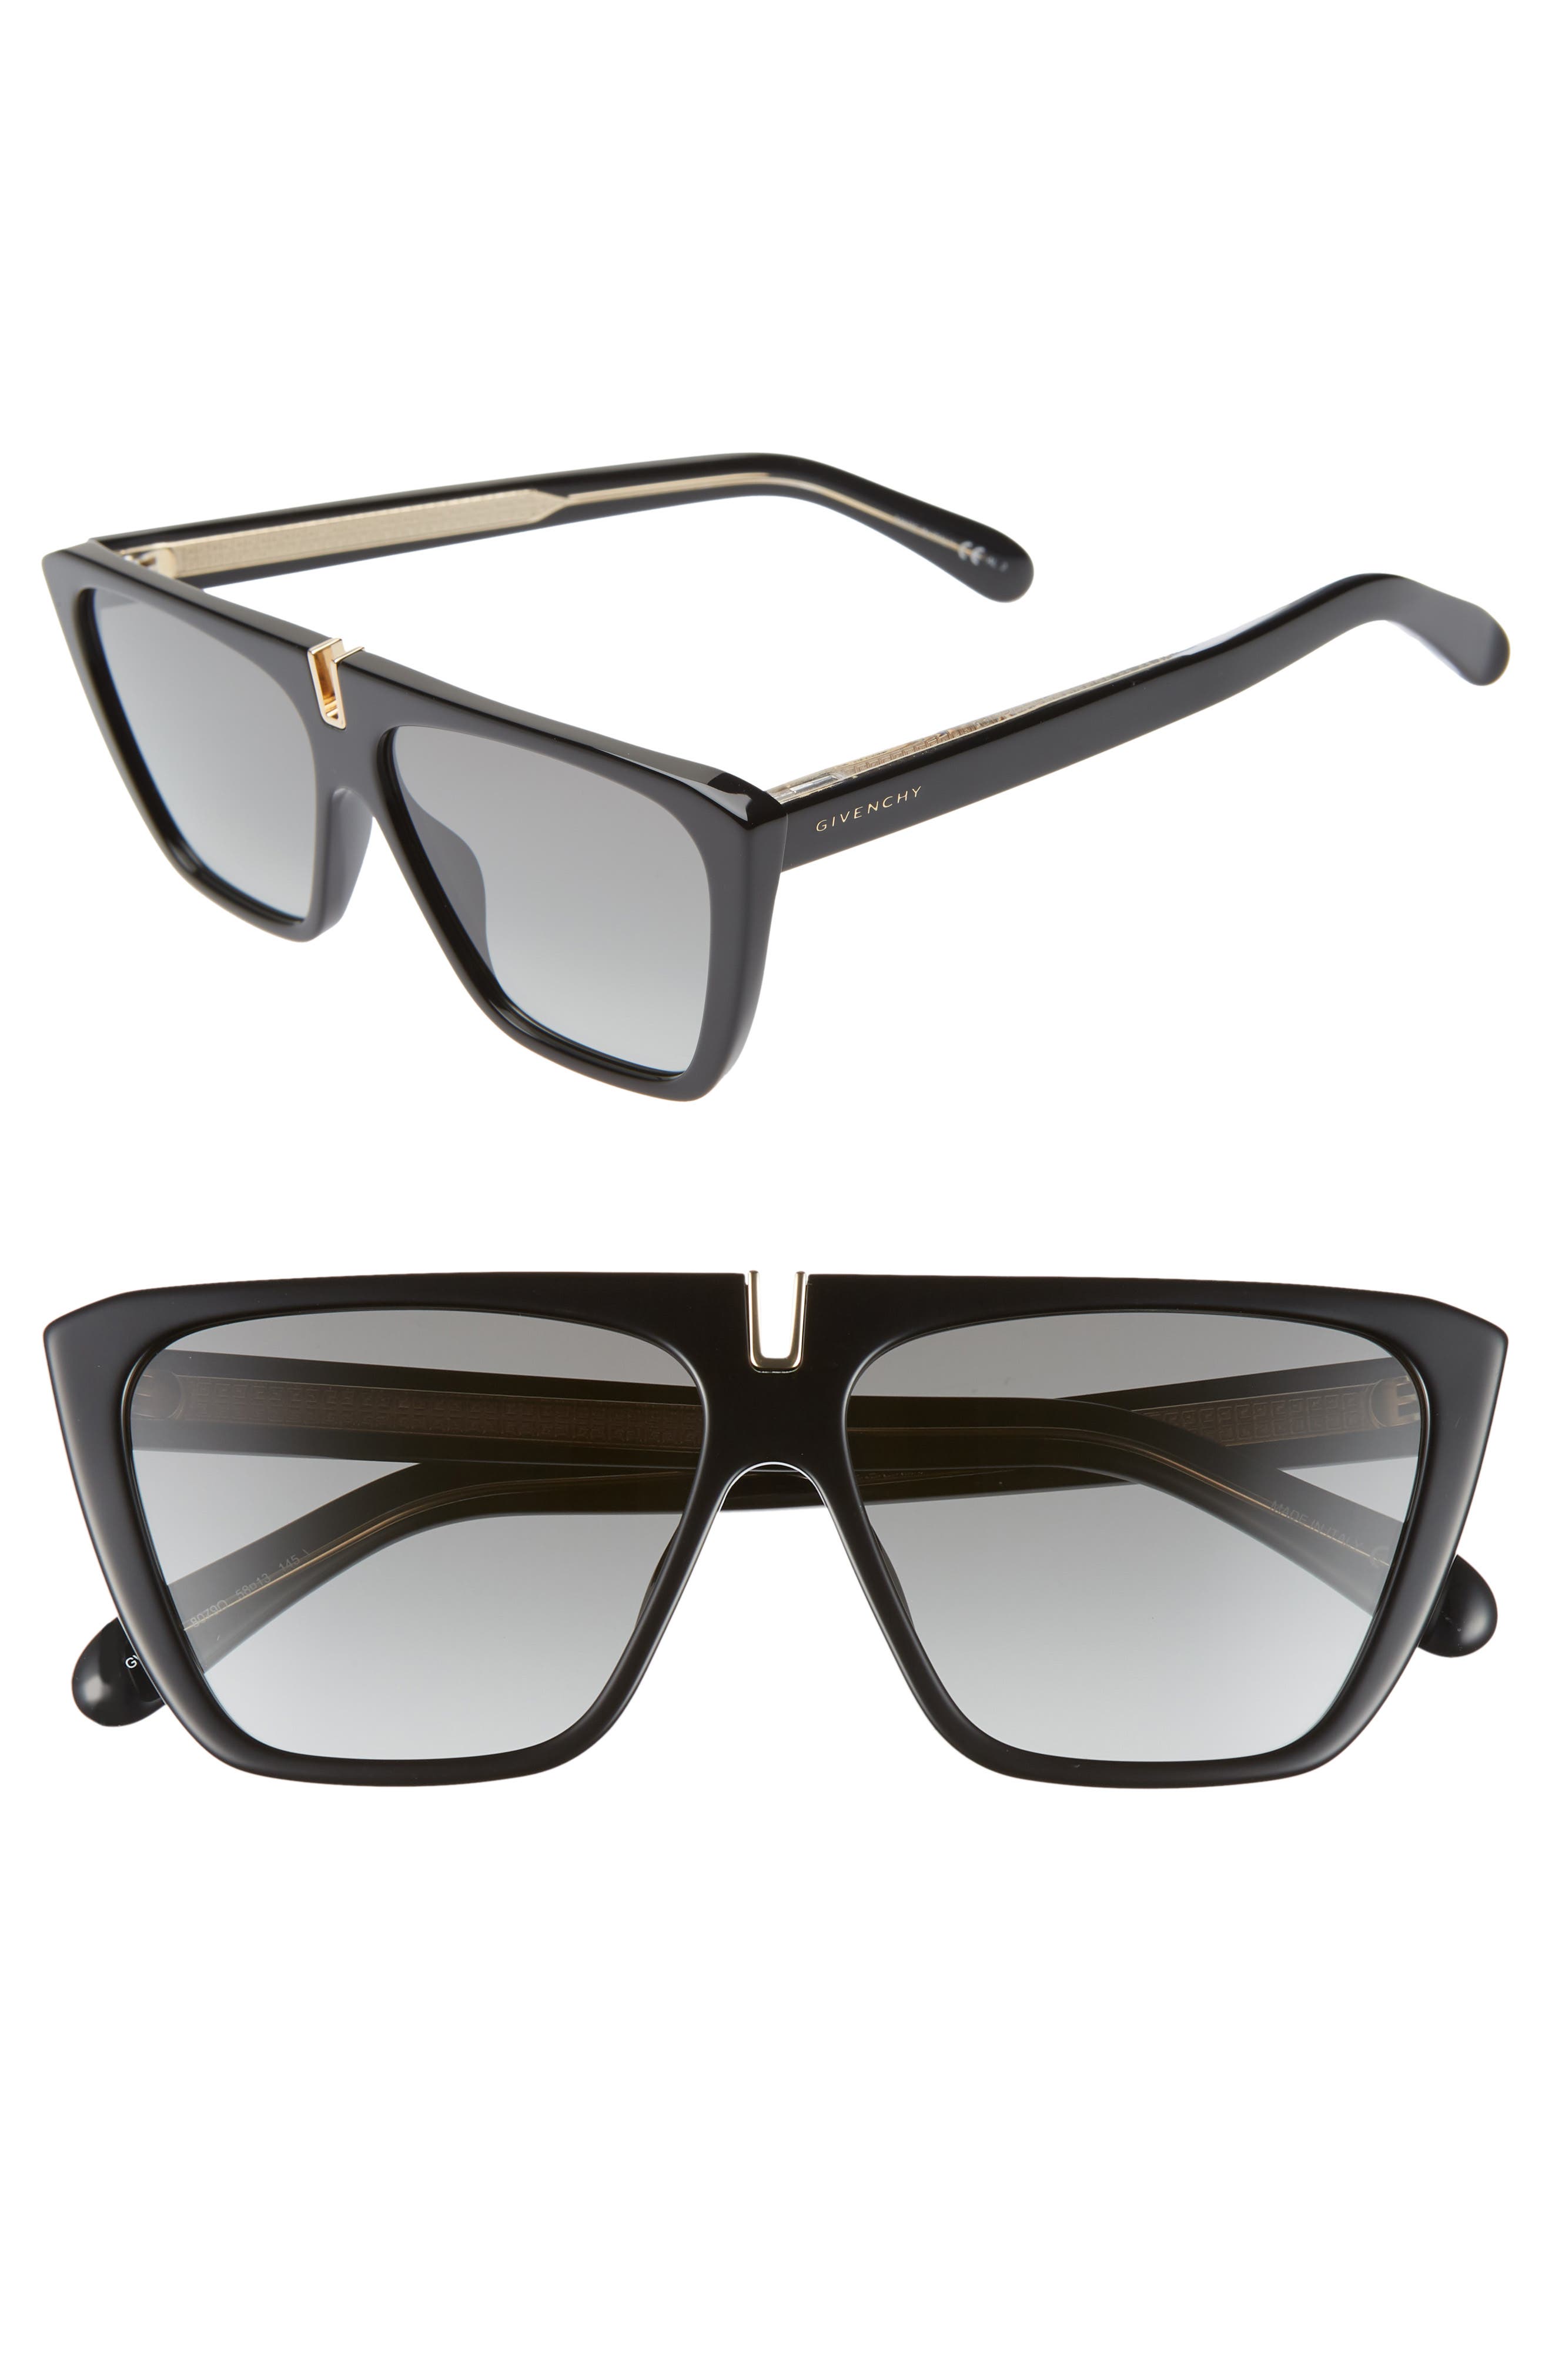 Givenchy 58mm Flat Top Sunglasses 